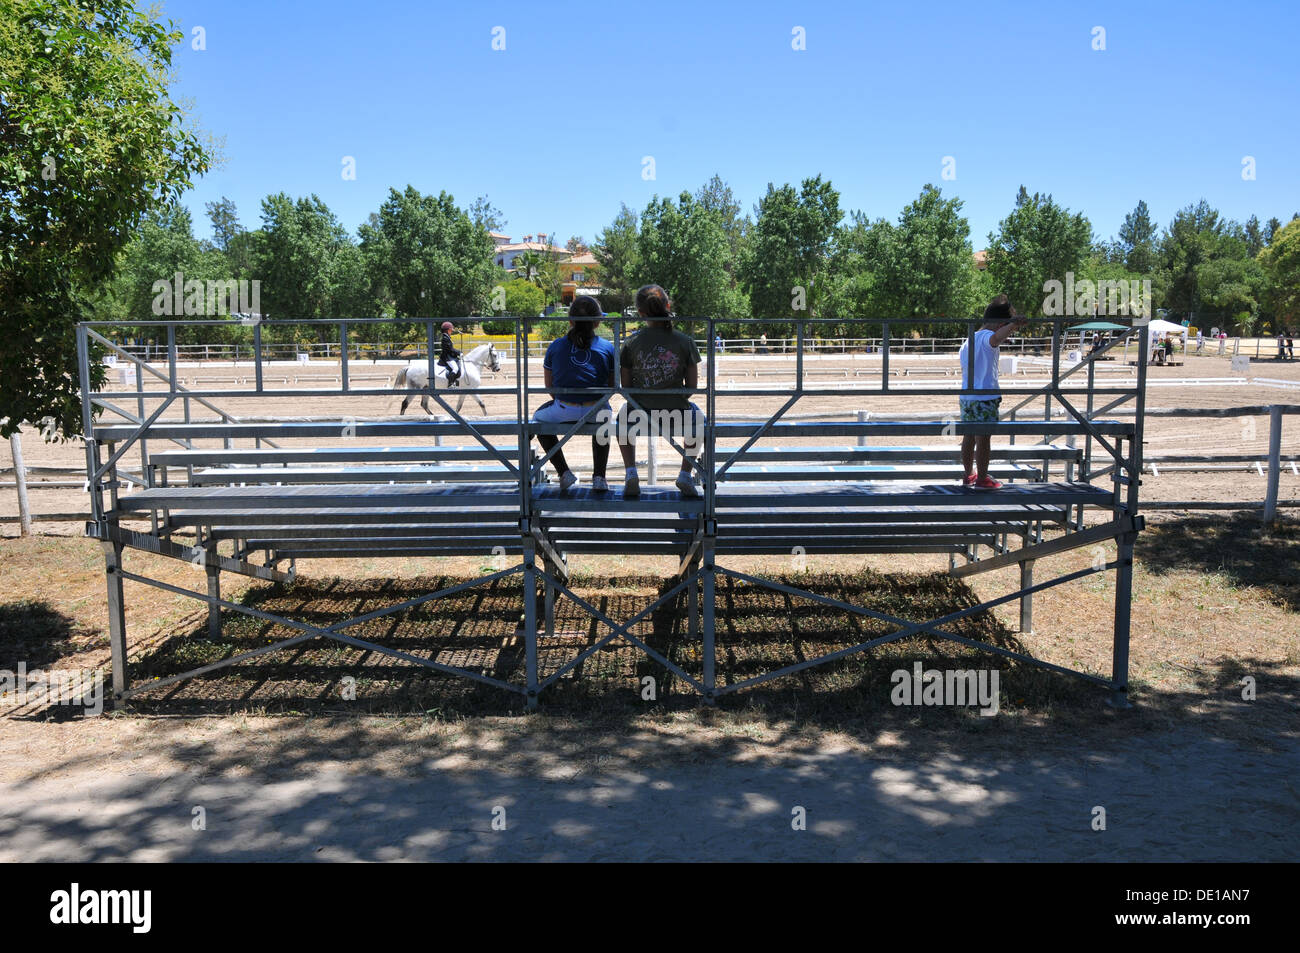 Back view of two people watching dressage event from iron stand. Stock Photo